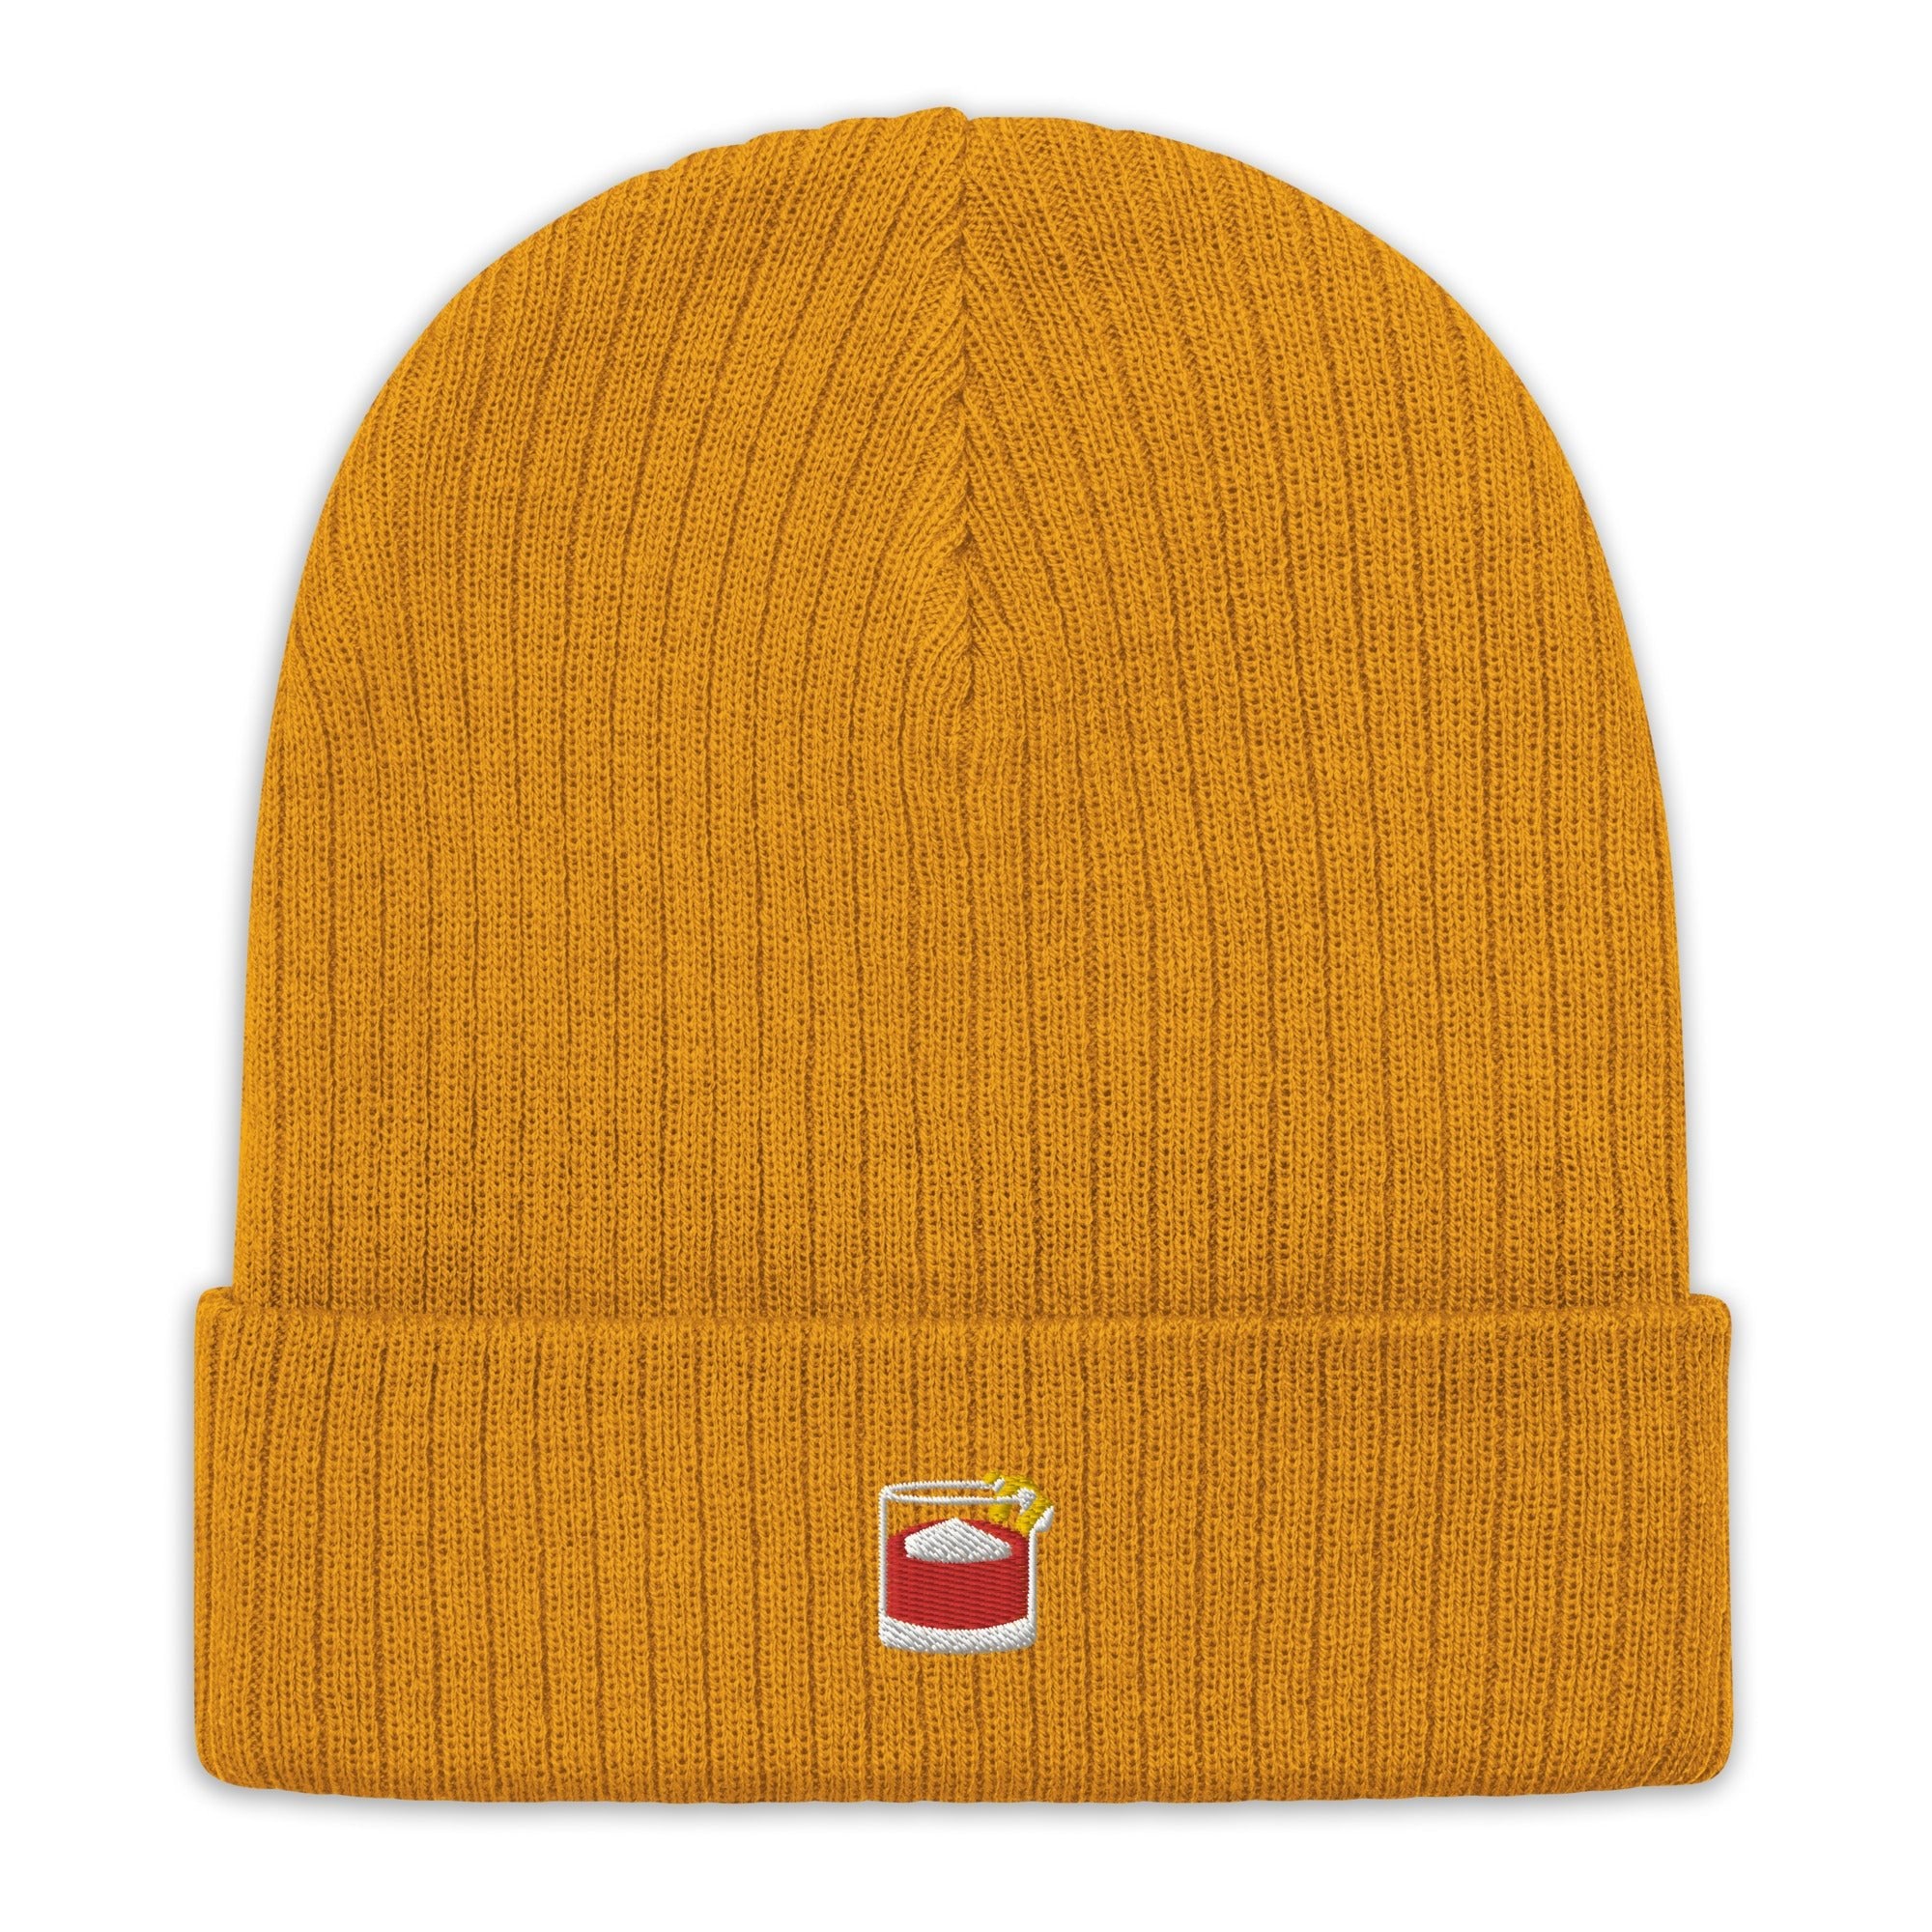 Negroni Glass - Embroidered Beanie - The Refined Spirit